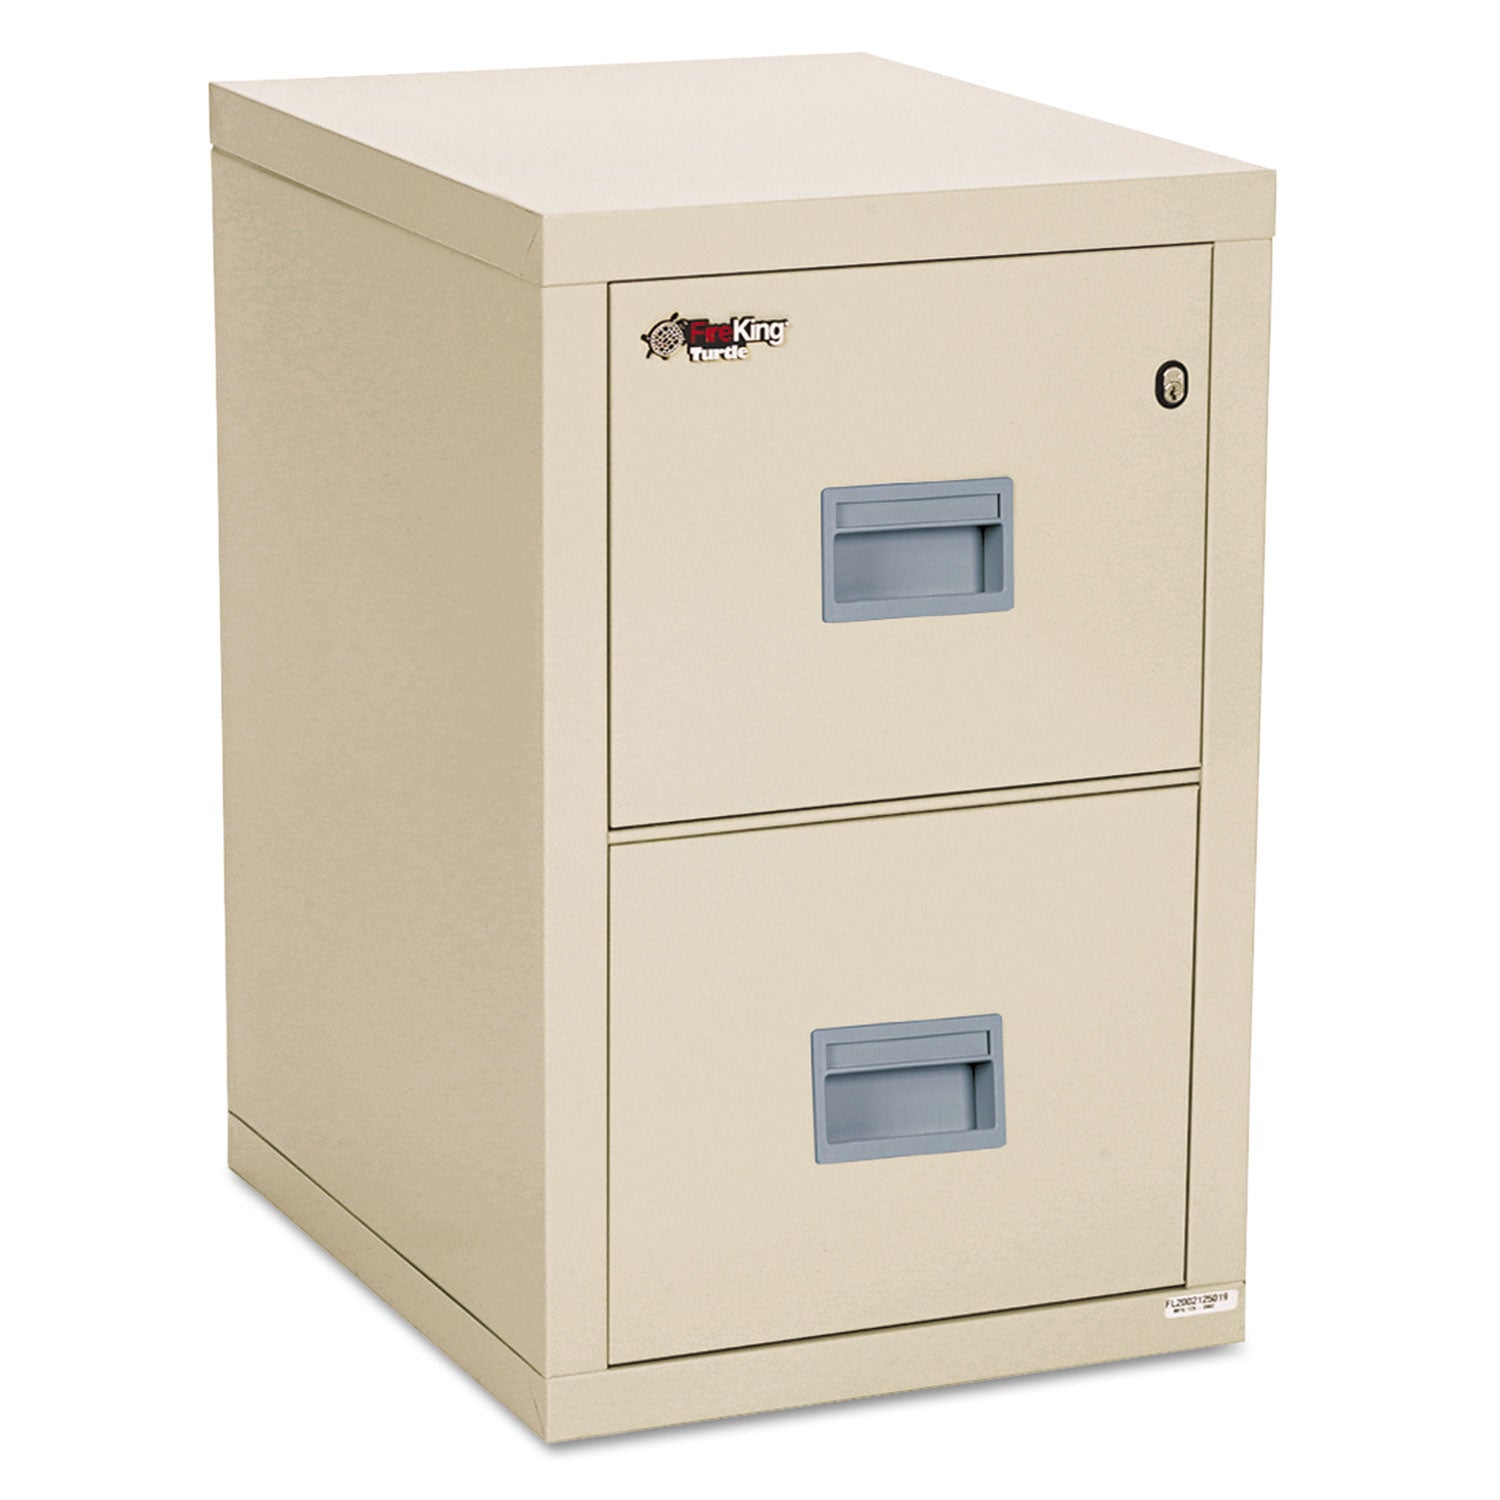 Compact Turtle Insulated Vertical File, 1-Hour Fire, 2 Legal/Letter File Drawers, Parchment, 17.75" x 22.13" x 27.75 - 